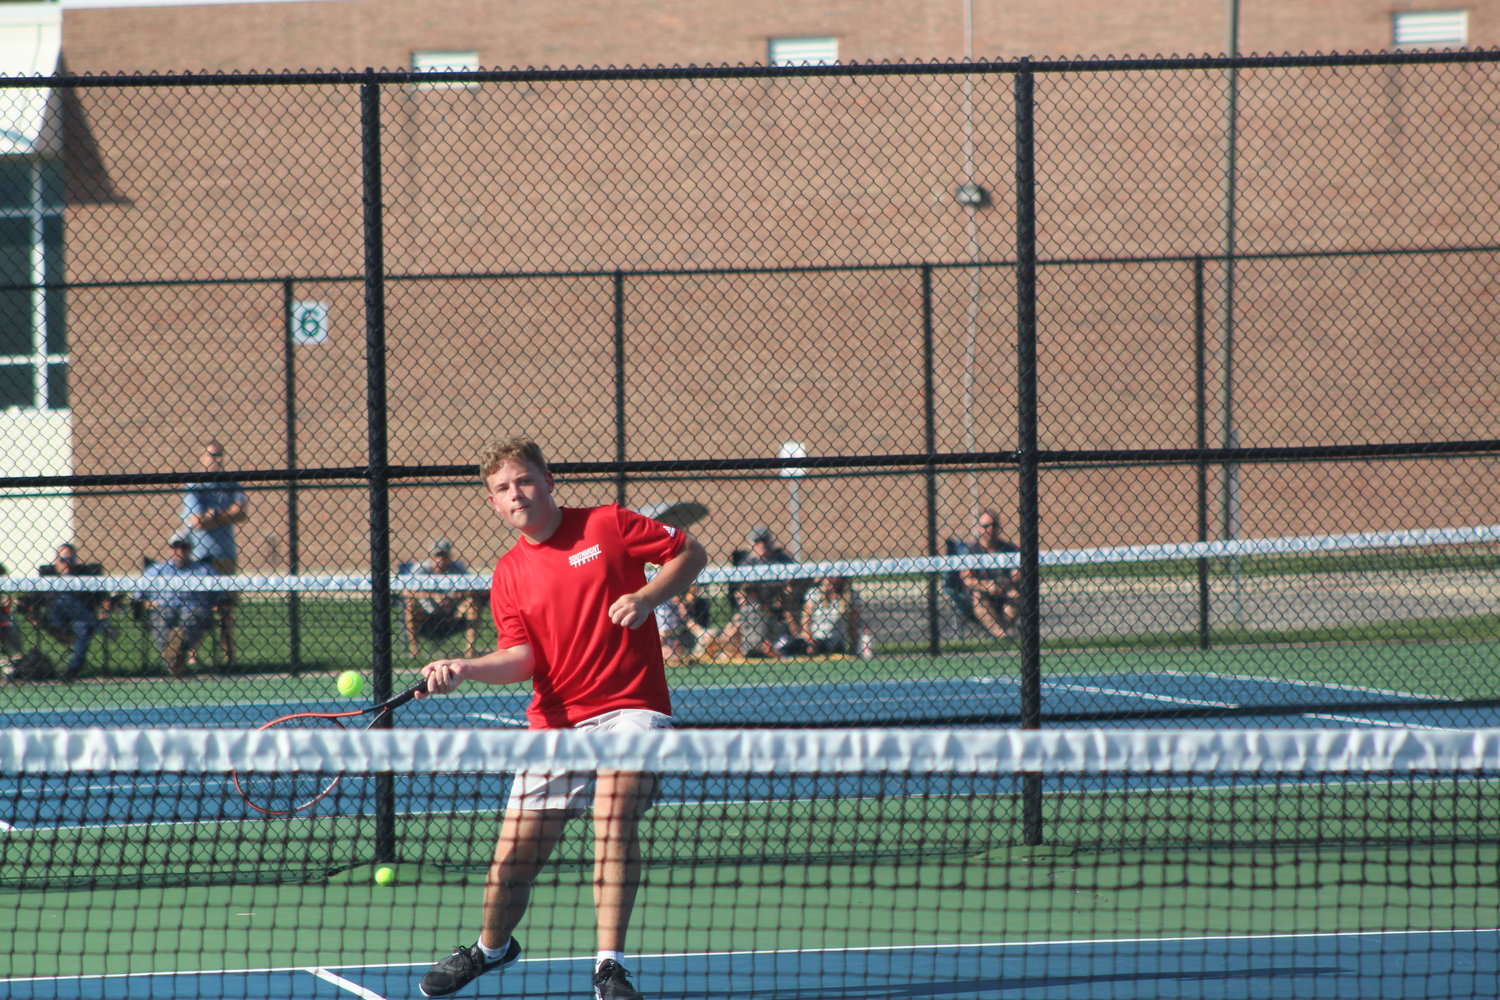 Harrison Haddock notched the other win for the Mounties at 3 singles.